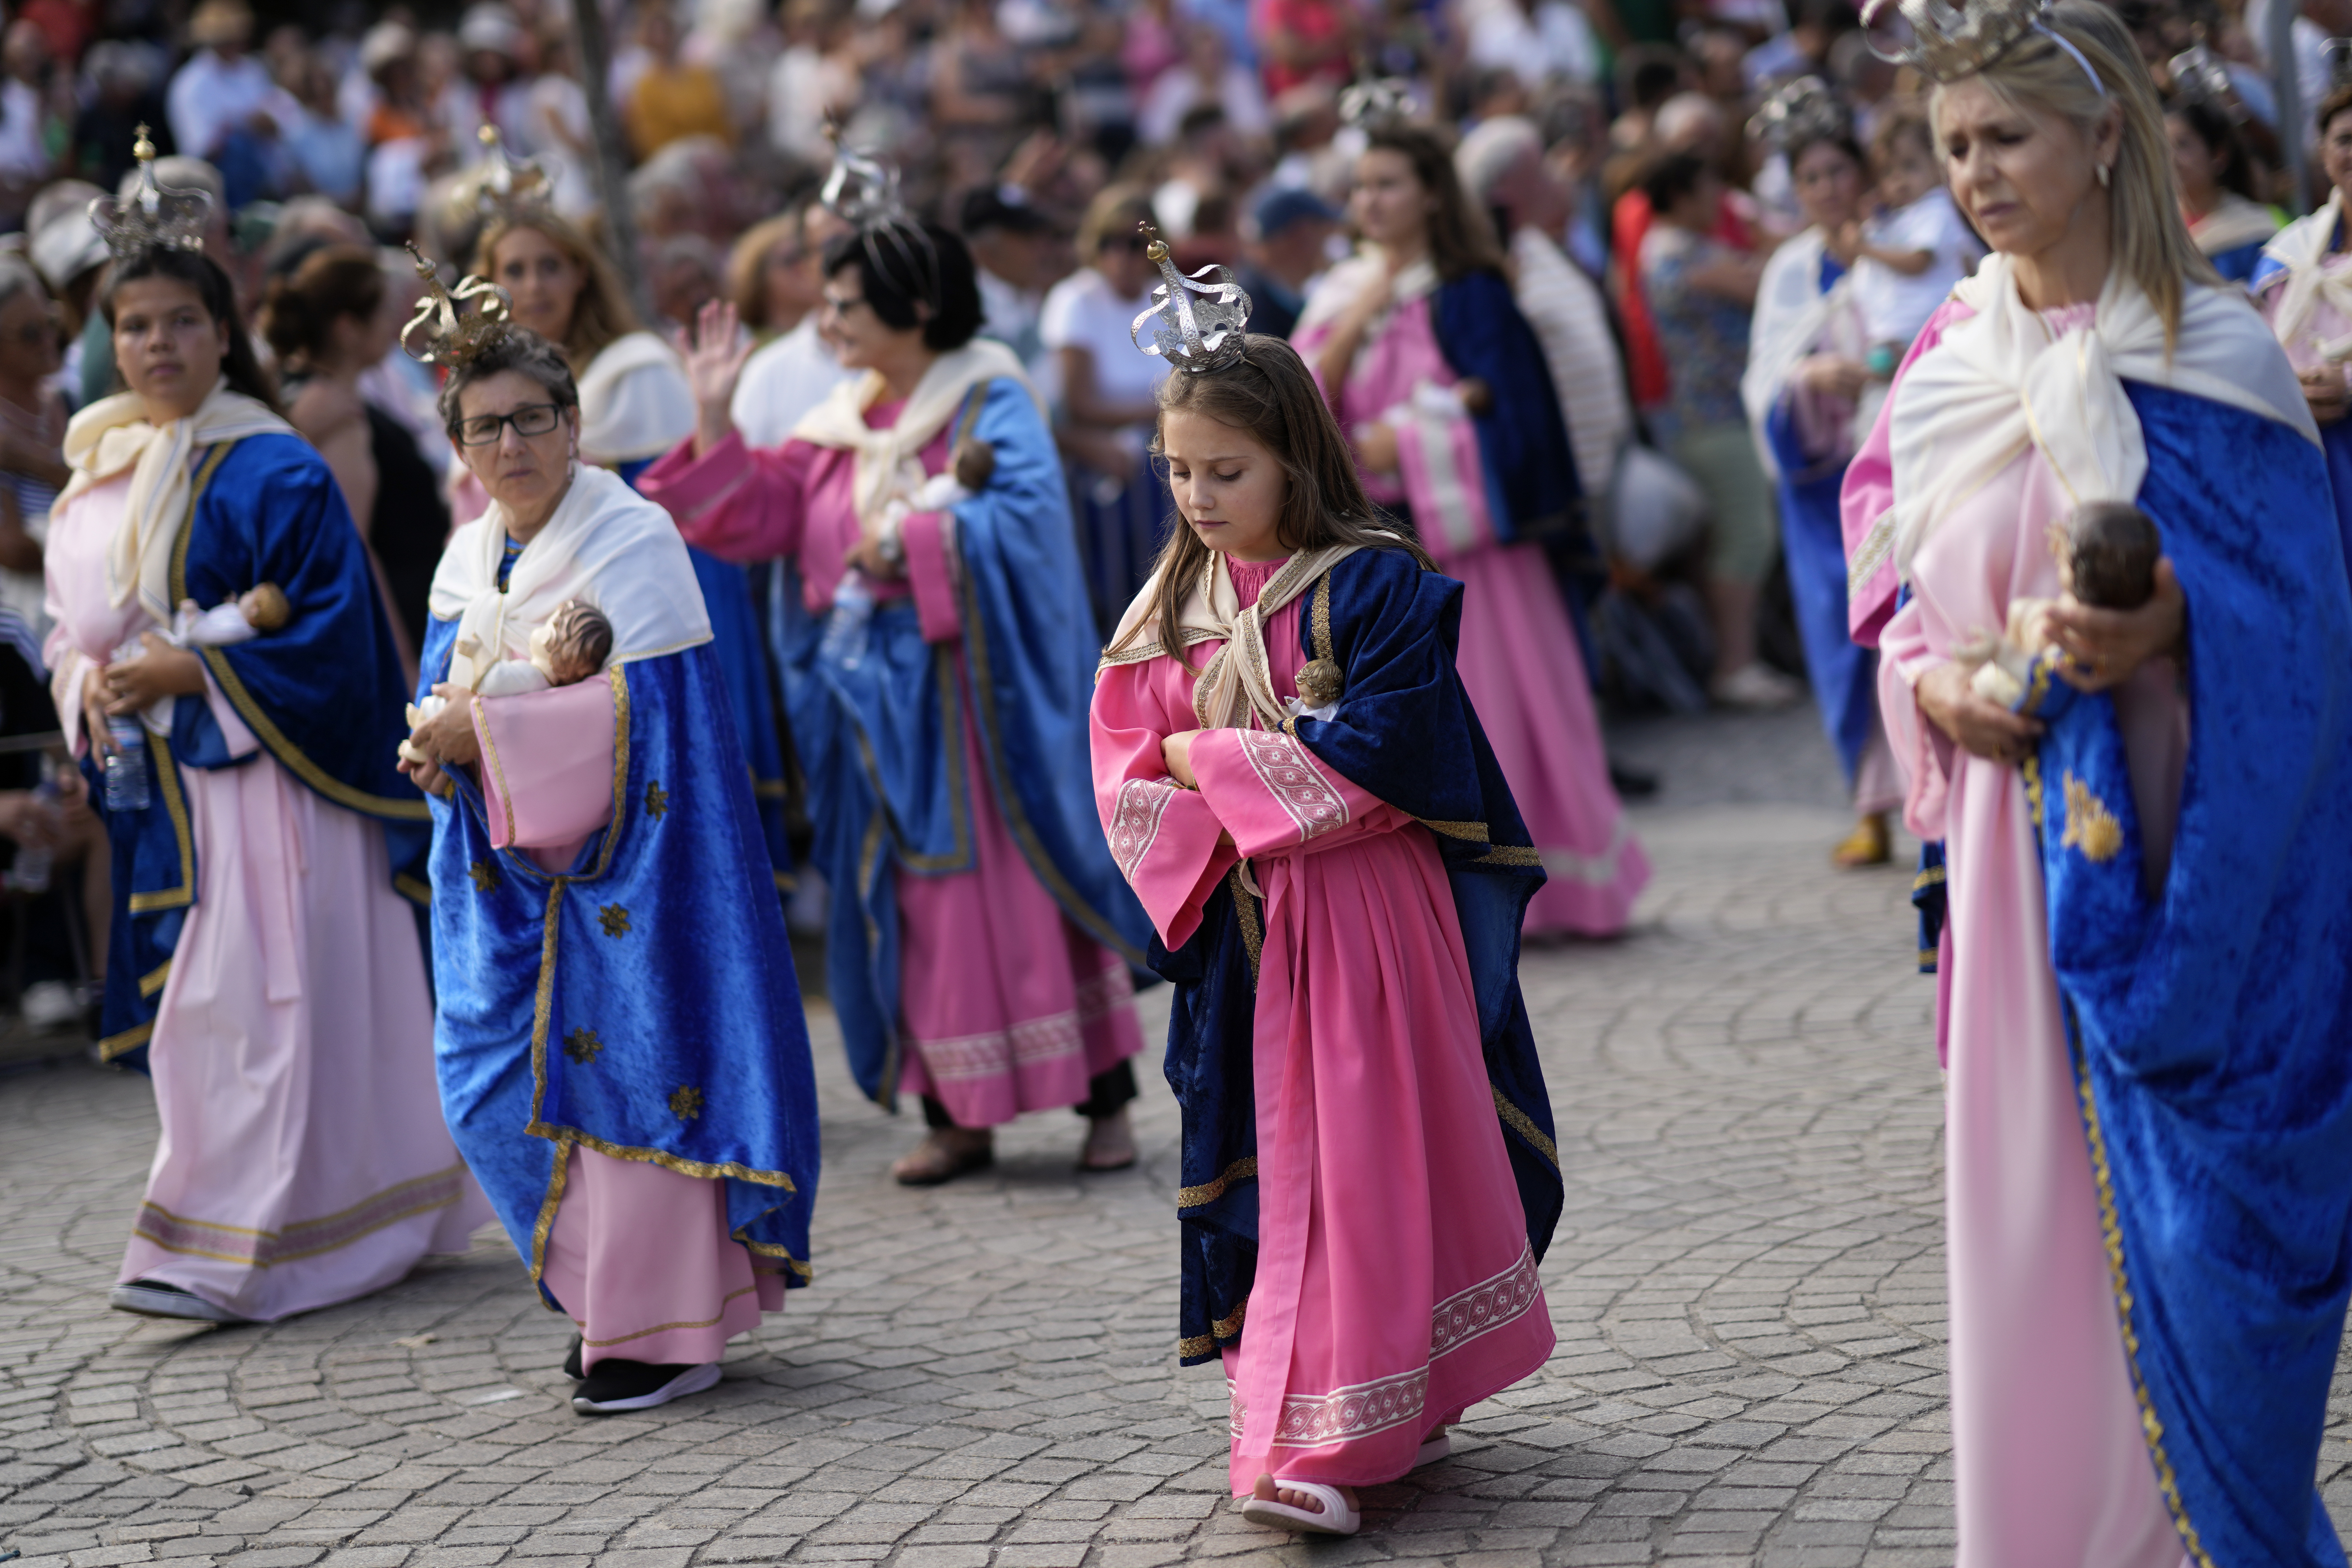 Women and girls dressed in pink and blue like the Virgin statue and carrying Jesus dolls, take part in the Our Lady of Remedies procession in the small town of Lamego, in the Douro River Valley, Portugal, Friday, Sept. 8, 2023. One of Portugal's largest and oldest religious festivals, the two-week celebrations that culminate with the procession, draw thousands. (AP Photo/Armando Franca)